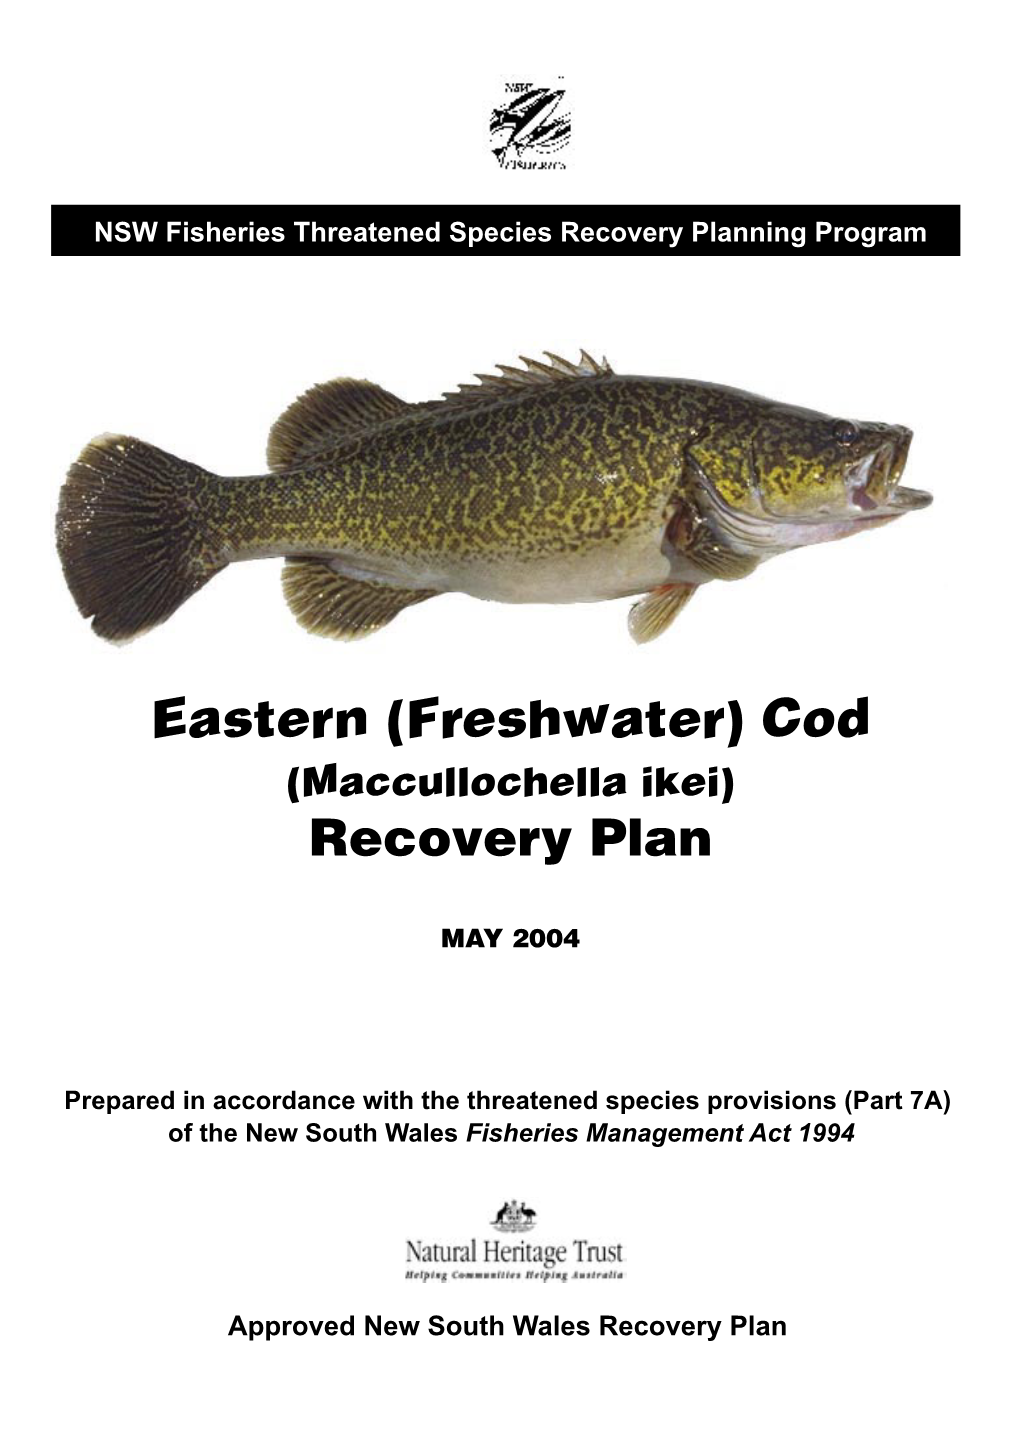 Eastern-Freshwater-Cod-Recovery